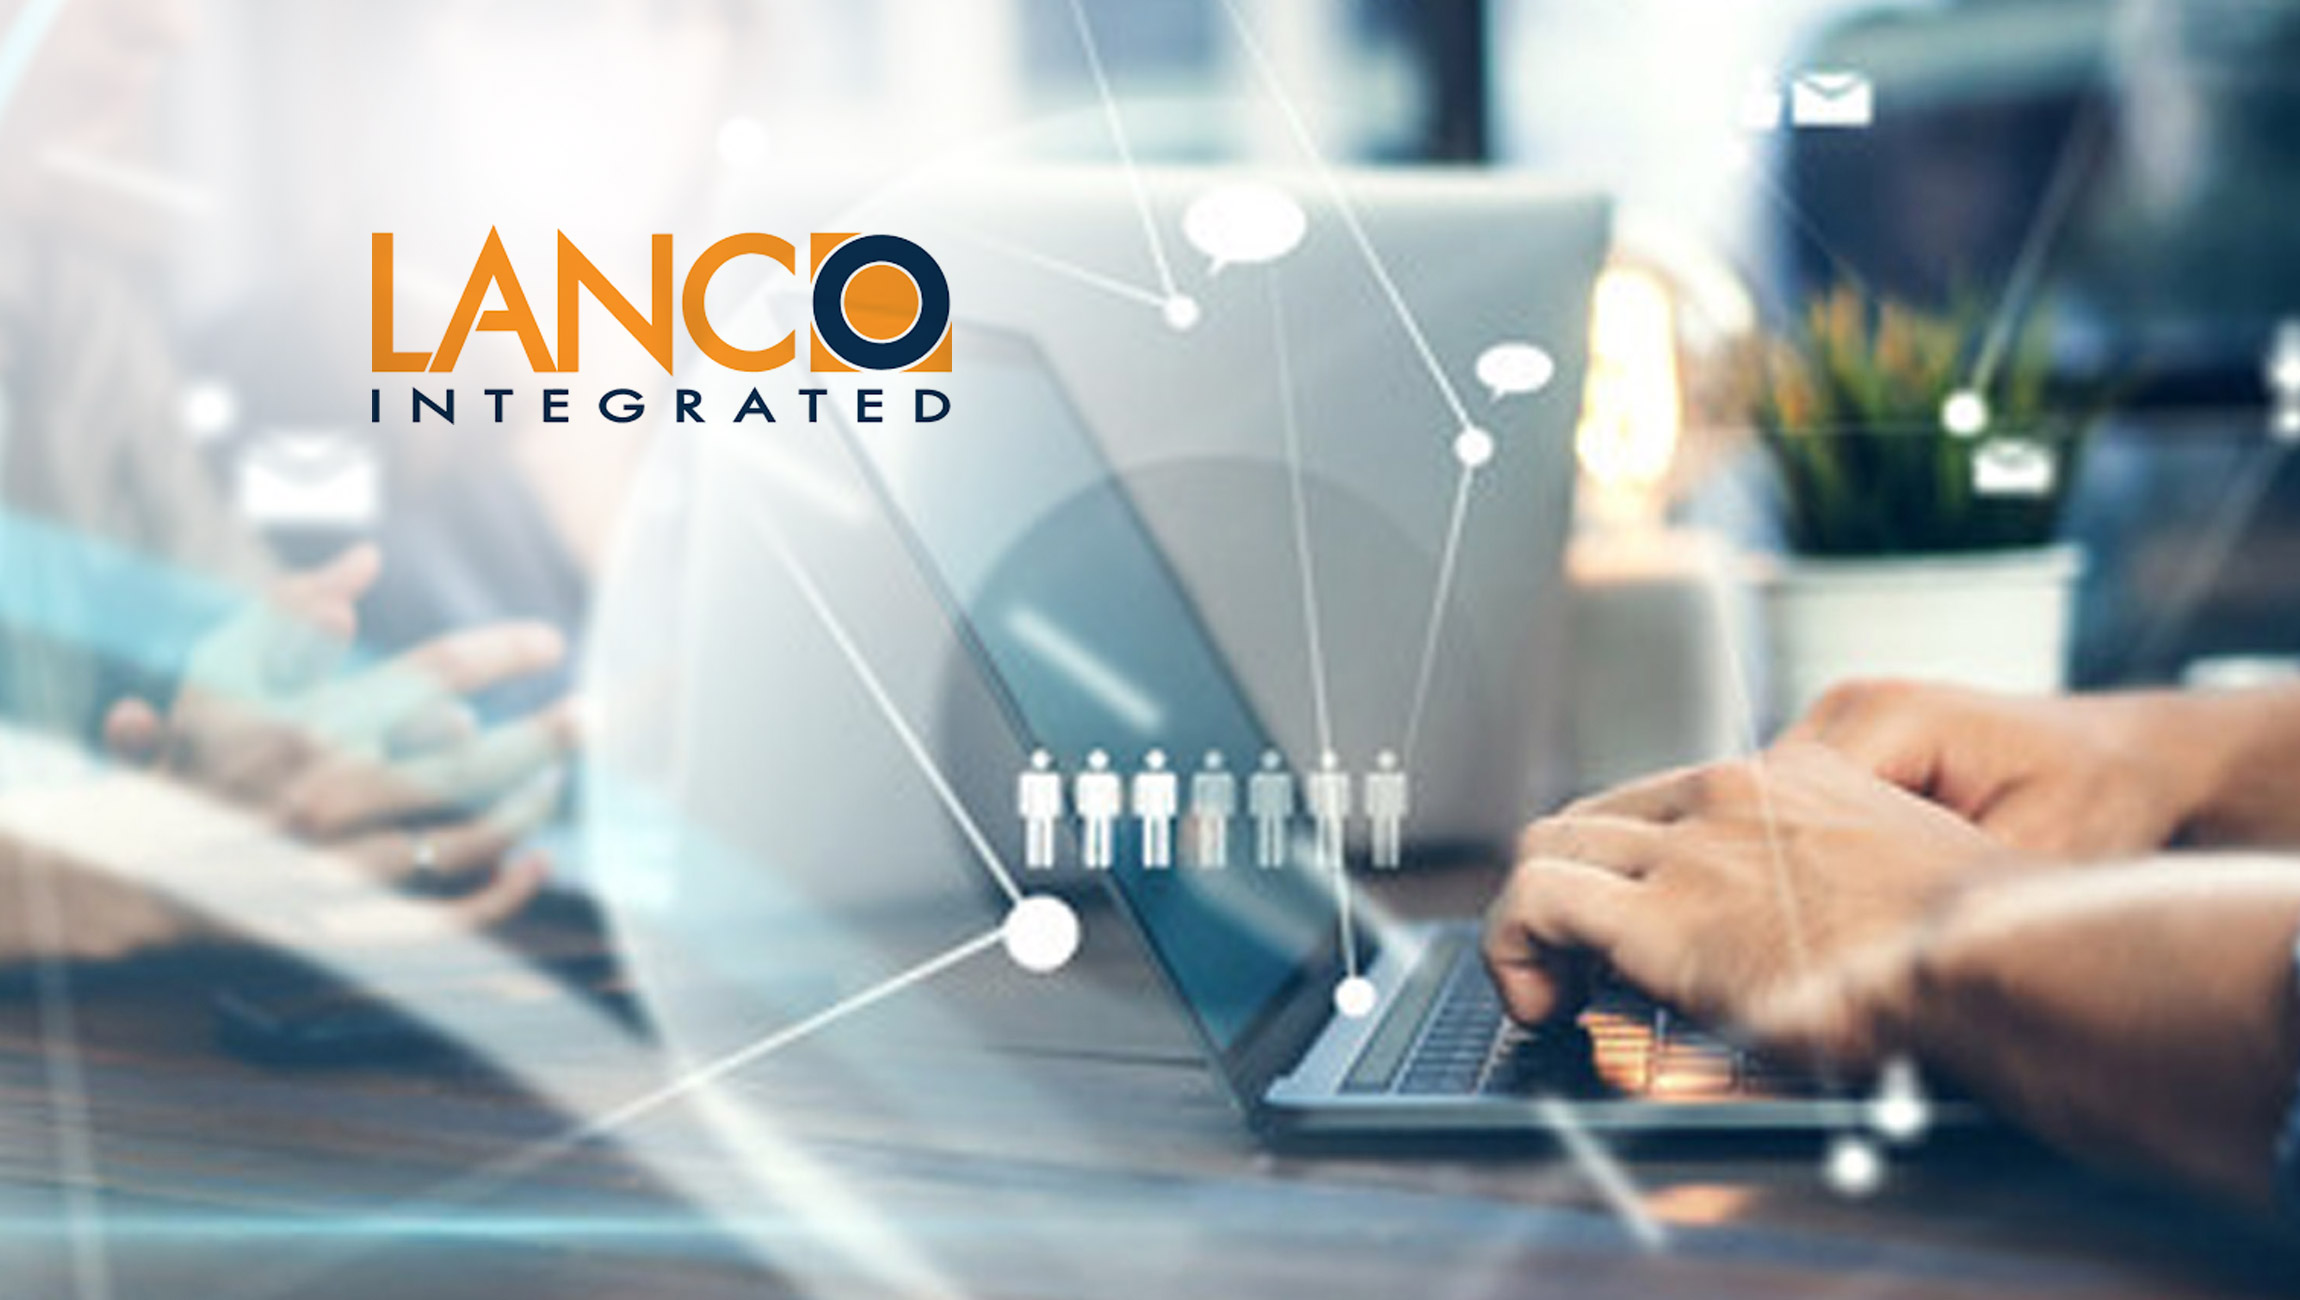 Lanco Integrated Brings on New VP of Sales and Marketing and Leader of People and Culture as They Begin to Expand Their Footprint Into Asia and Mexico